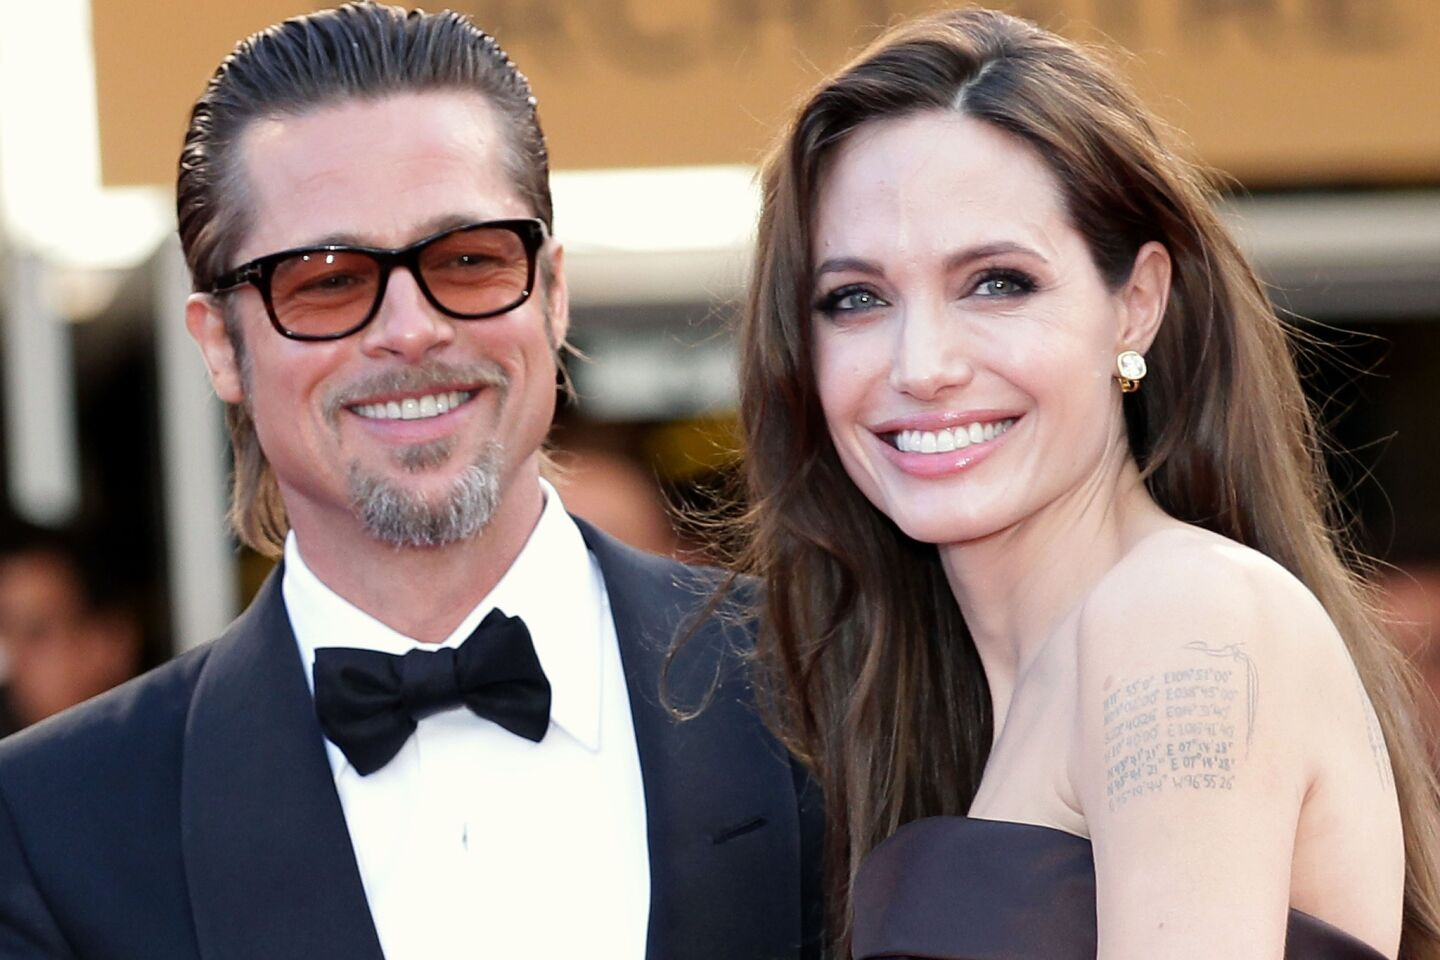 Brad Pitt was previously married to Angelina Jolie